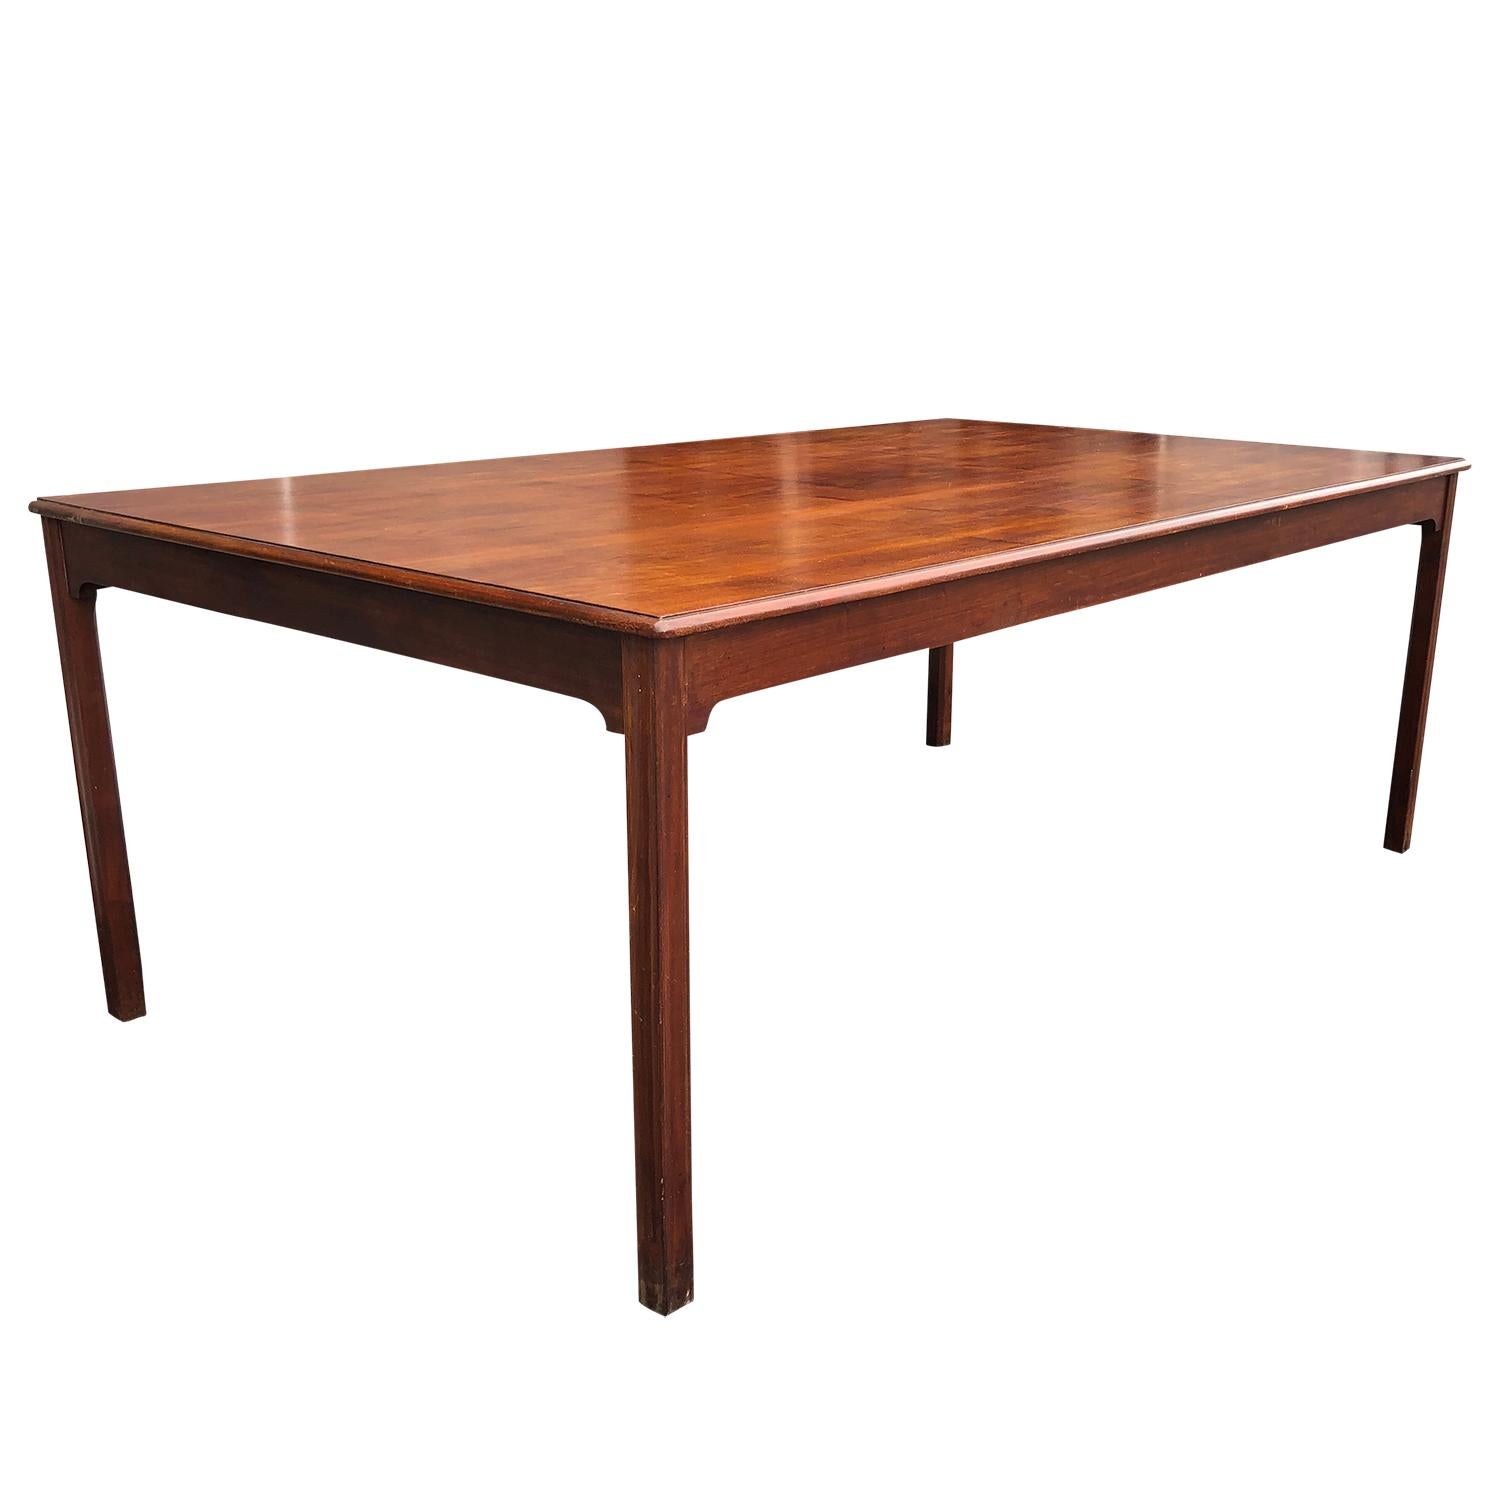 A rectangular, vintage Mid-Century Modern Danish dining table made of hand crafted polished Cuban Mahogany. The Scandinavian conference table was designed by Kaare Klint, in good condition. Minor scratches, due to age. Wear consistent with age and